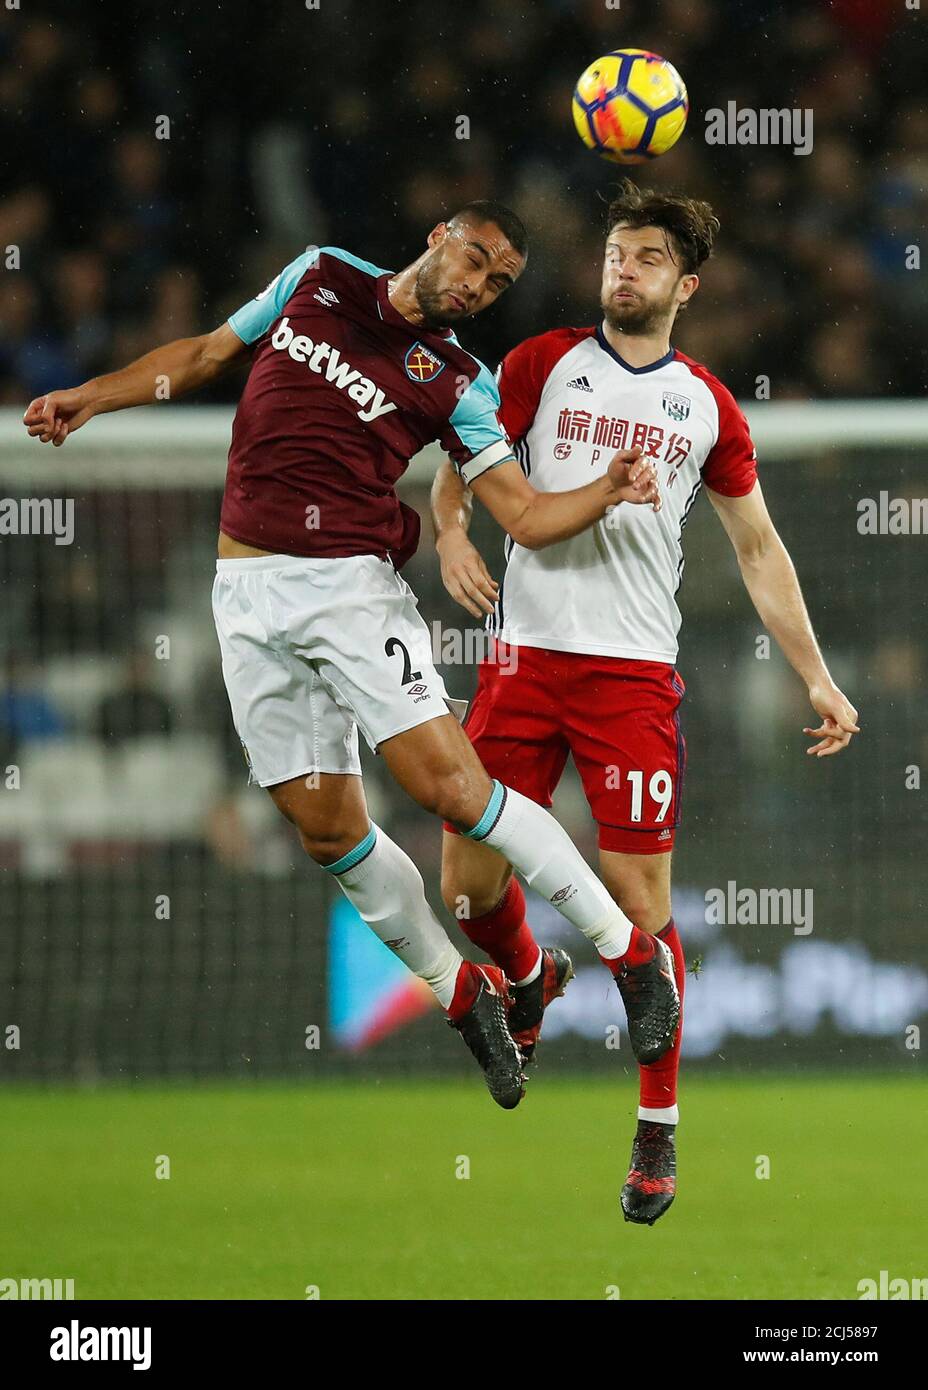 Soccer Football - Premier League - West Ham United vs West Bromwich Albion - London Stadium, London, Britain - January 2, 2018   West Ham United's Winston Reid in action with West Bromwich Albion's Jay Rodriguez   REUTERS/Eddie Keogh    EDITORIAL USE ONLY. No use with unauthorized audio, video, data, fixture lists, club/league logos or 'live' services. Online in-match use limited to 75 images, no video emulation. No use in betting, games or single club/league/player publications.  Please contact your account representative for further details. Stock Photo